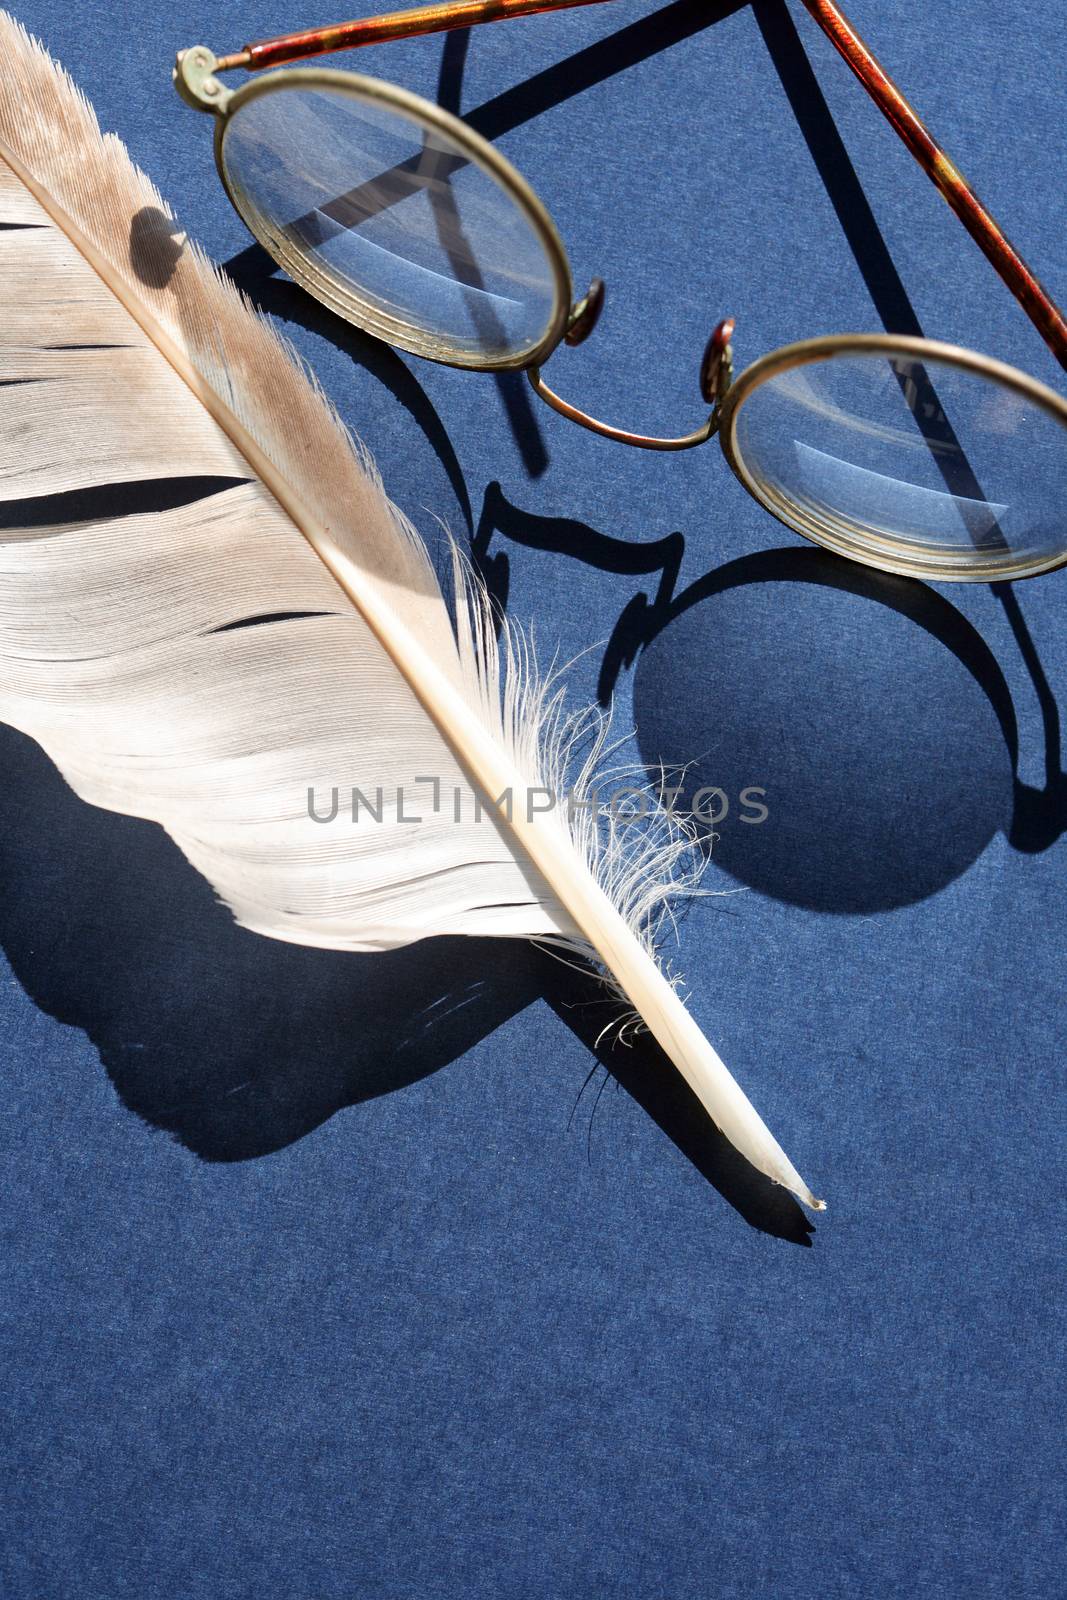 Old spectacles with shadow near feather against sun light